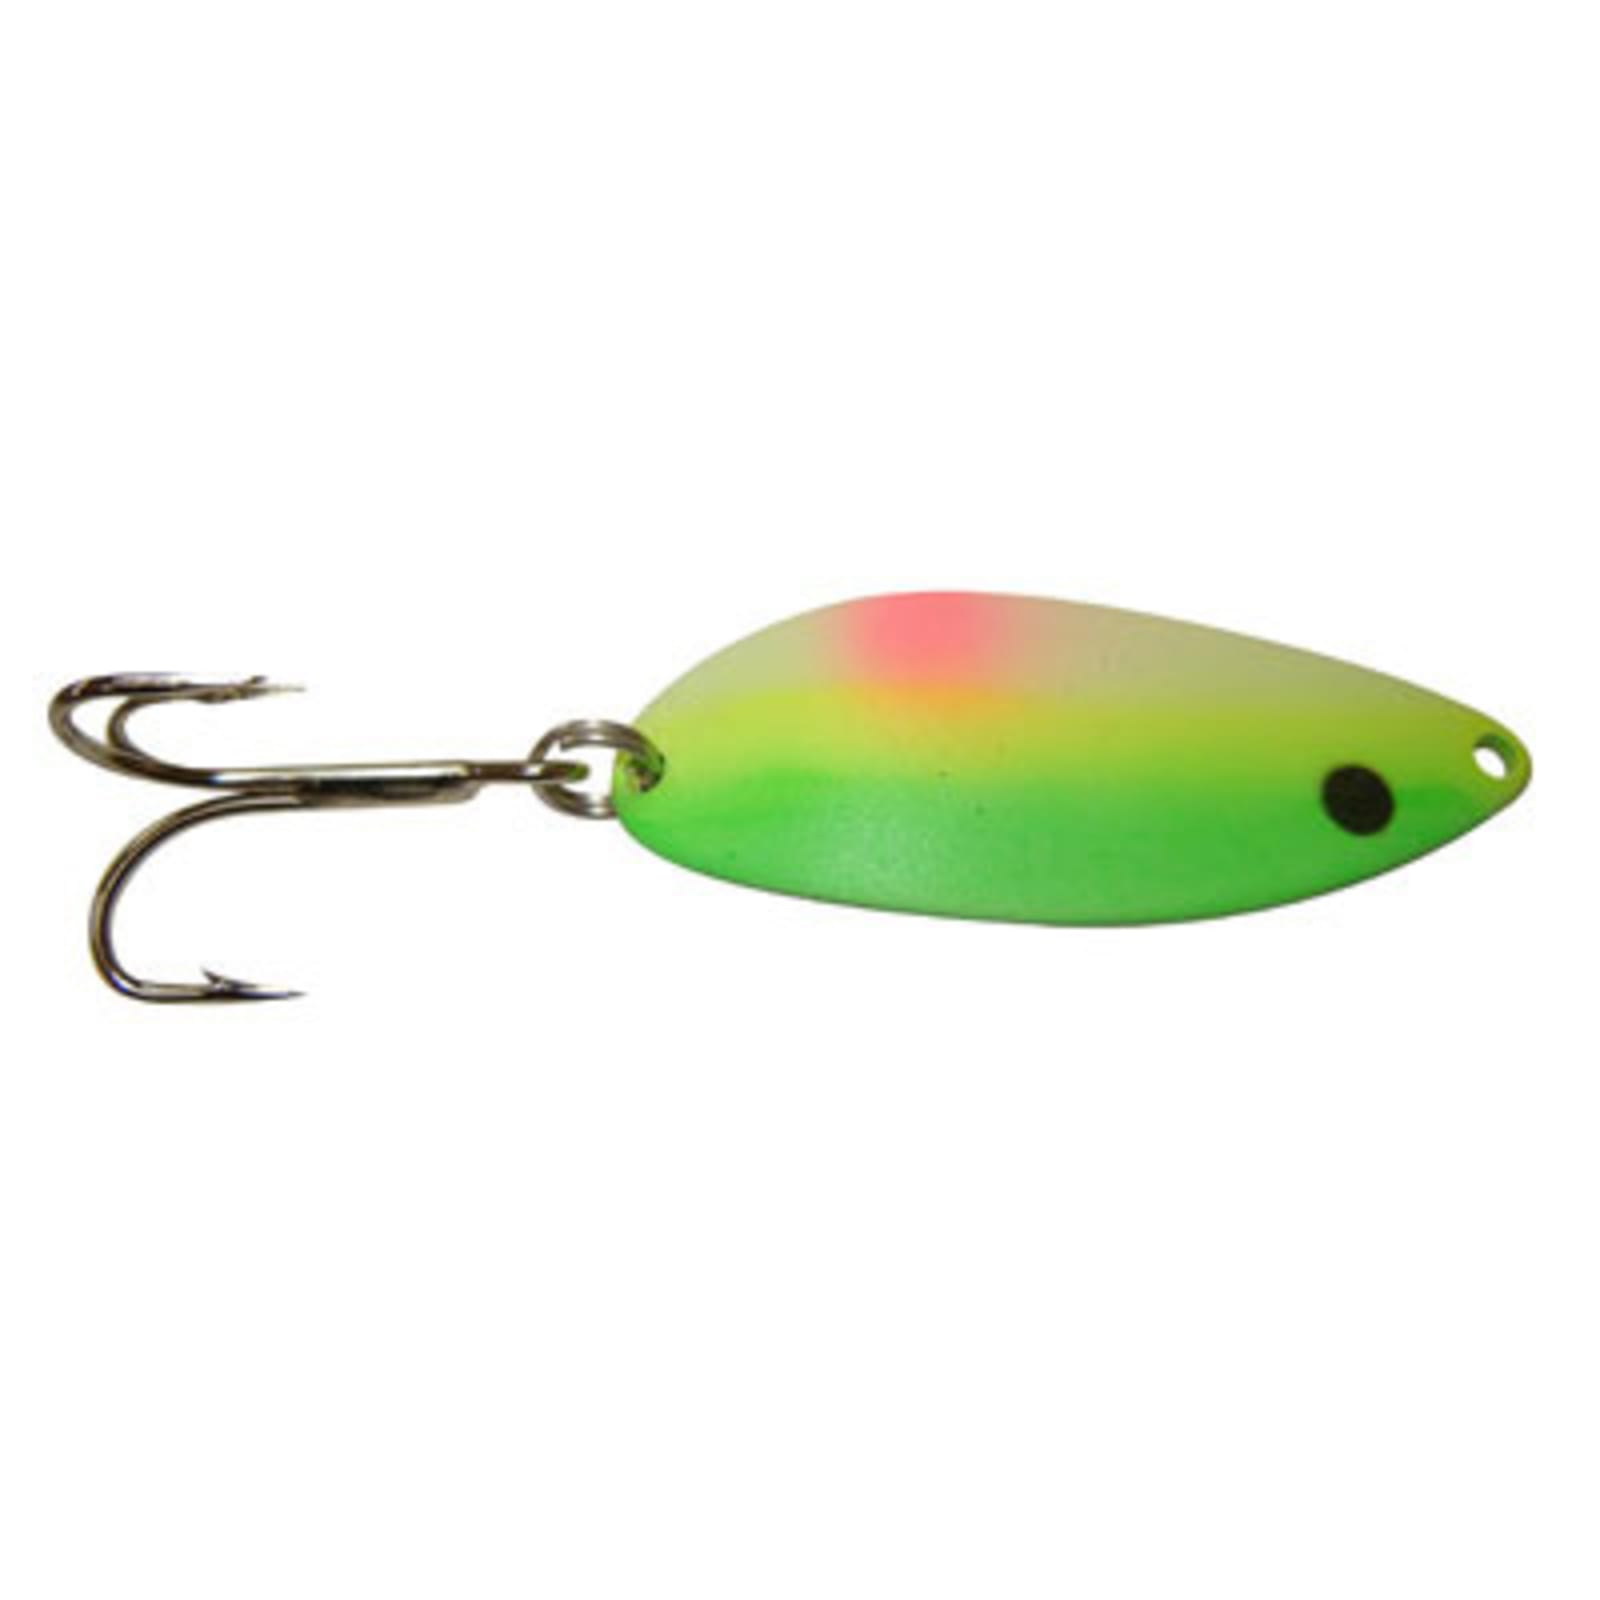 Little Cleo Spoon - Glow Green/Alewife by Acme Tackle Company at Fleet Farm